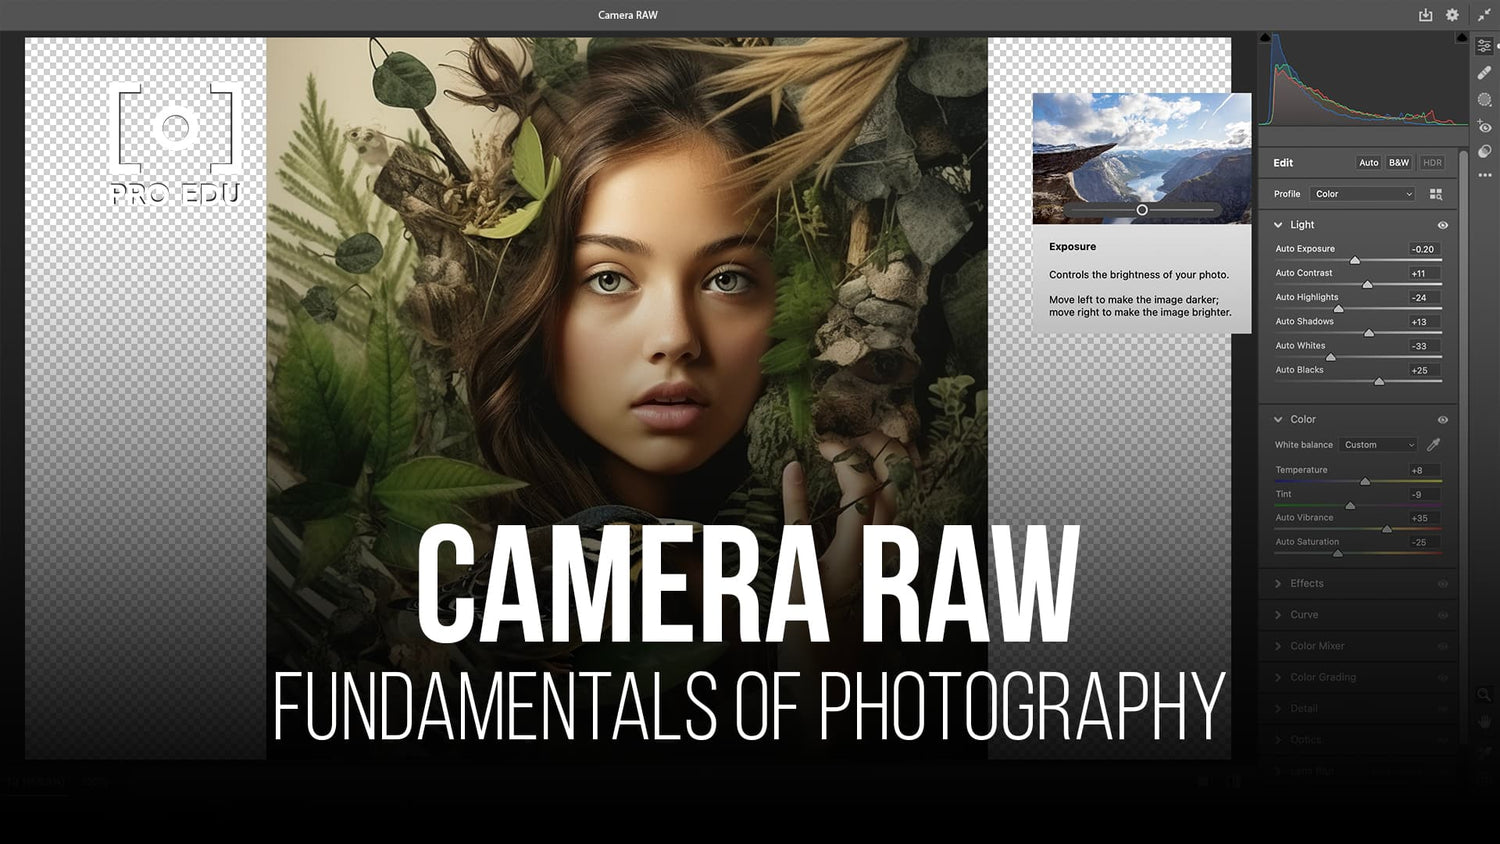 Unleashing the full photographic potential of camera raw files for superior image quality